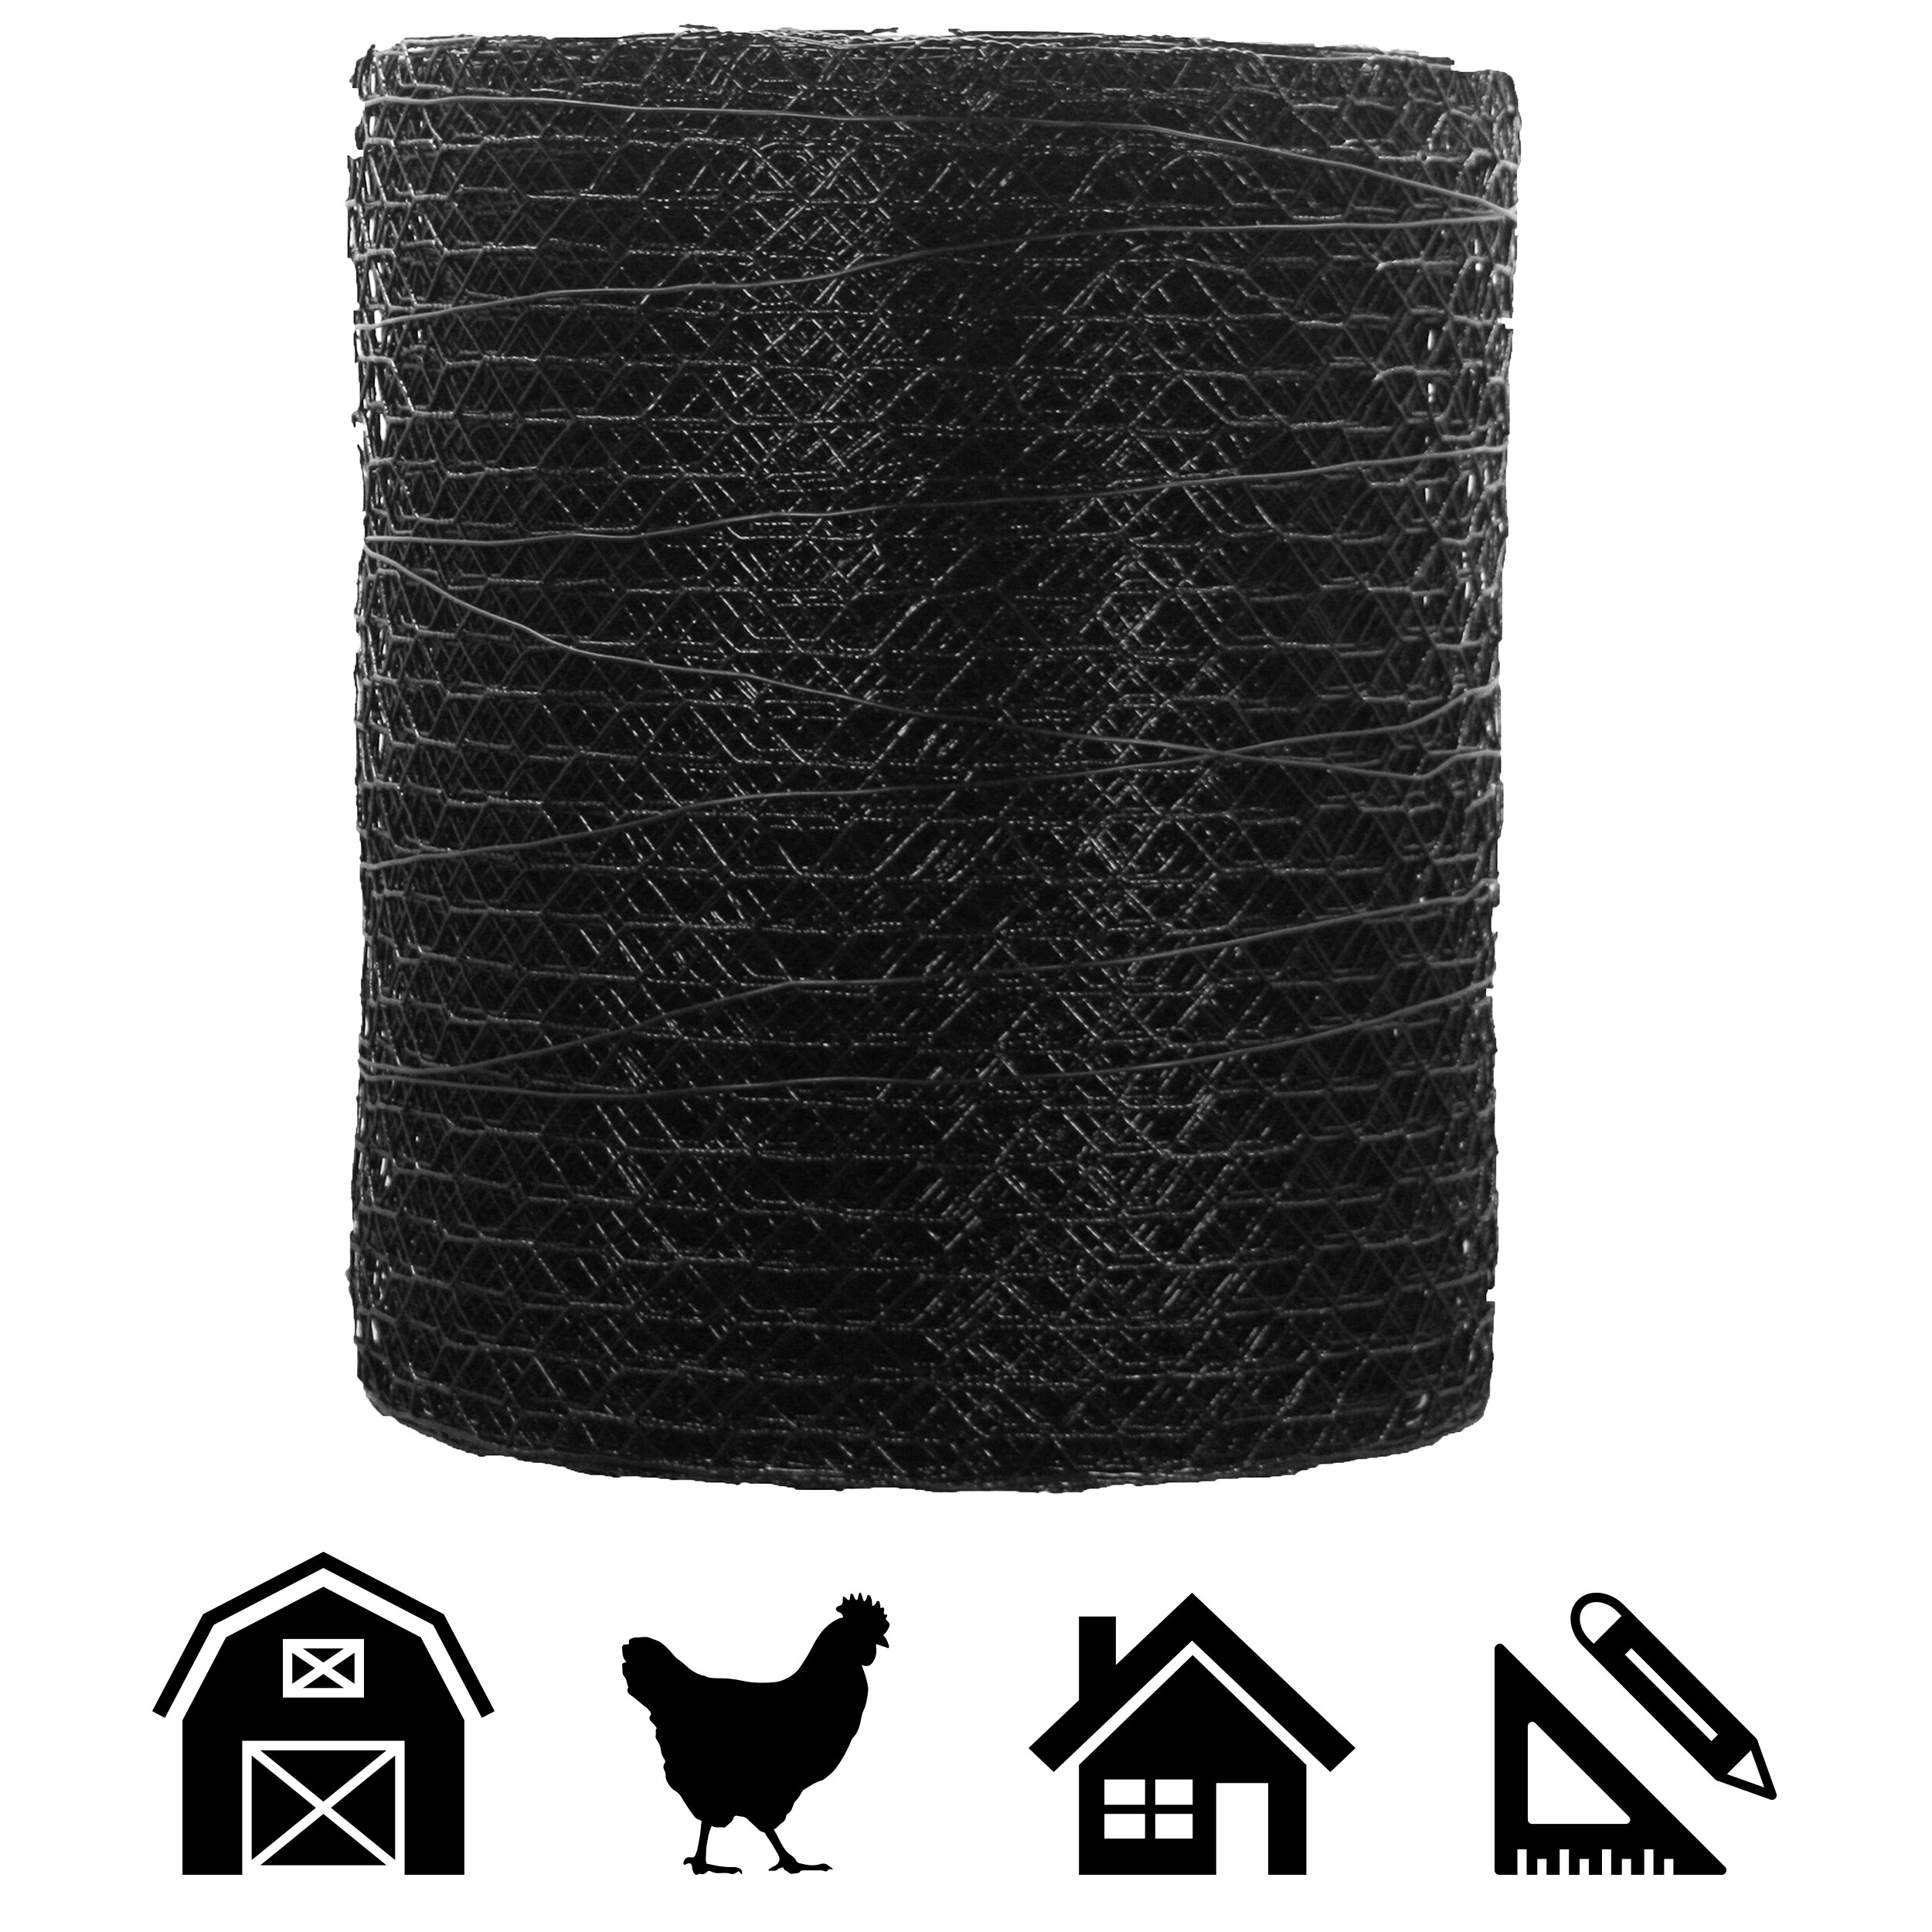 BOEN 25-ft x 3-ft 0-Gauge Black Hdpe Chicken Wire Rolled Fencing with Mesh  Size 1/2-in x 1-in in the Rolled Fencing department at